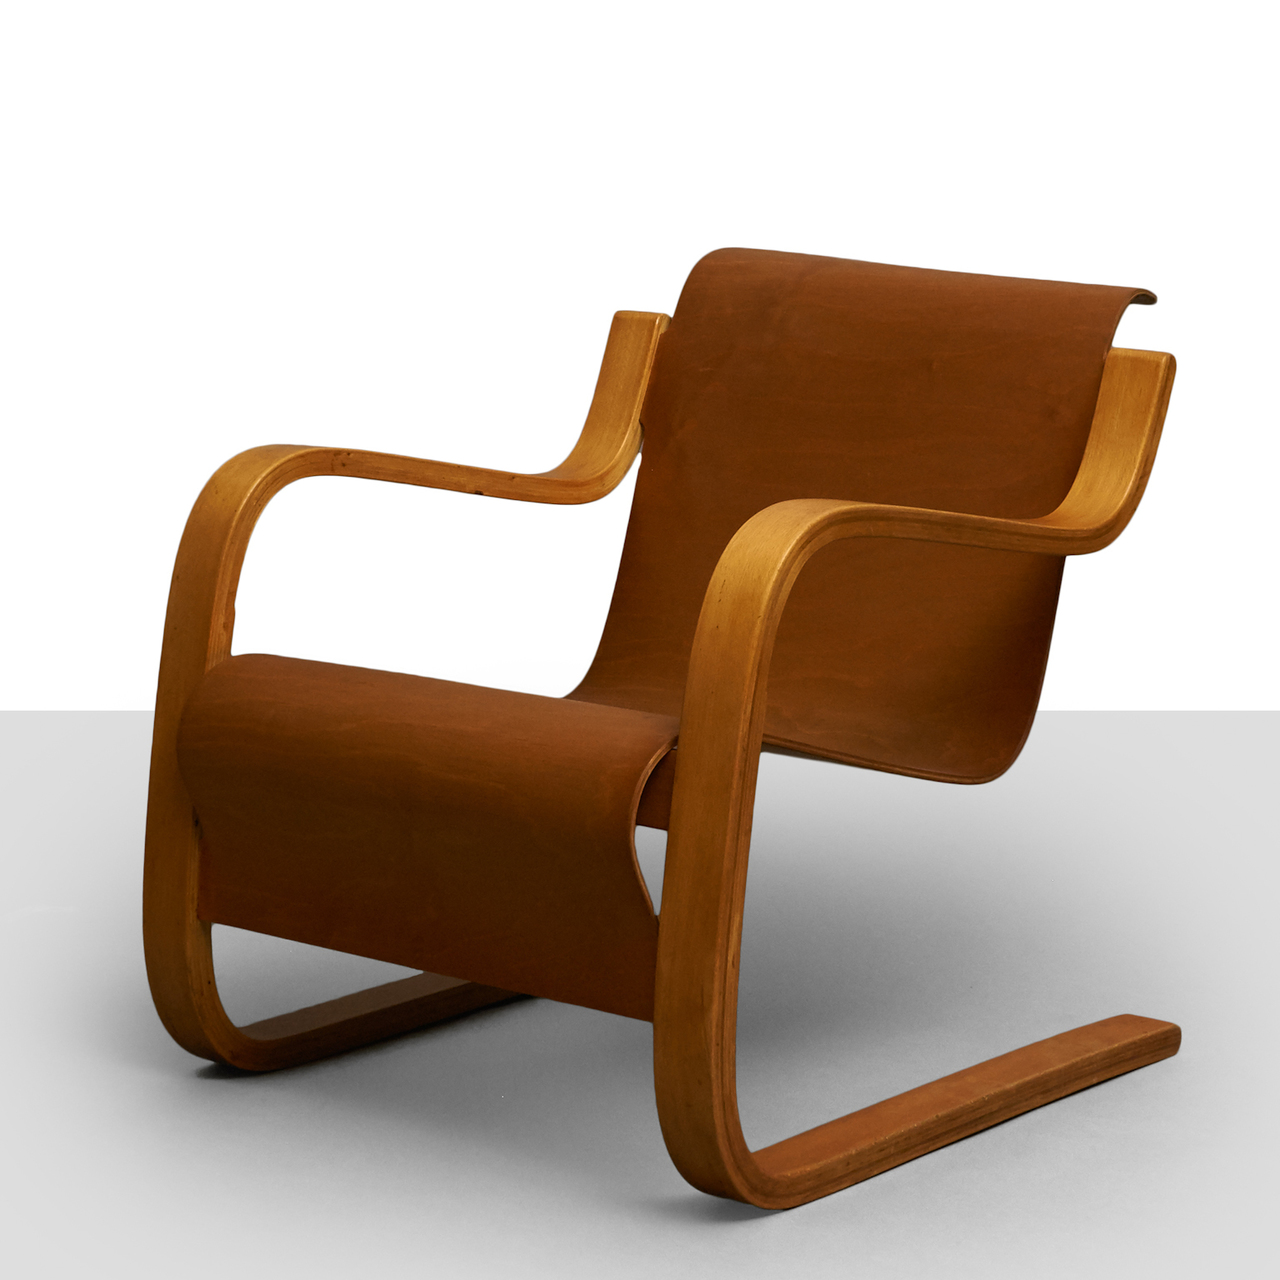 Alvar Aalto Cantilever Chair Model 31 – Almond and Company